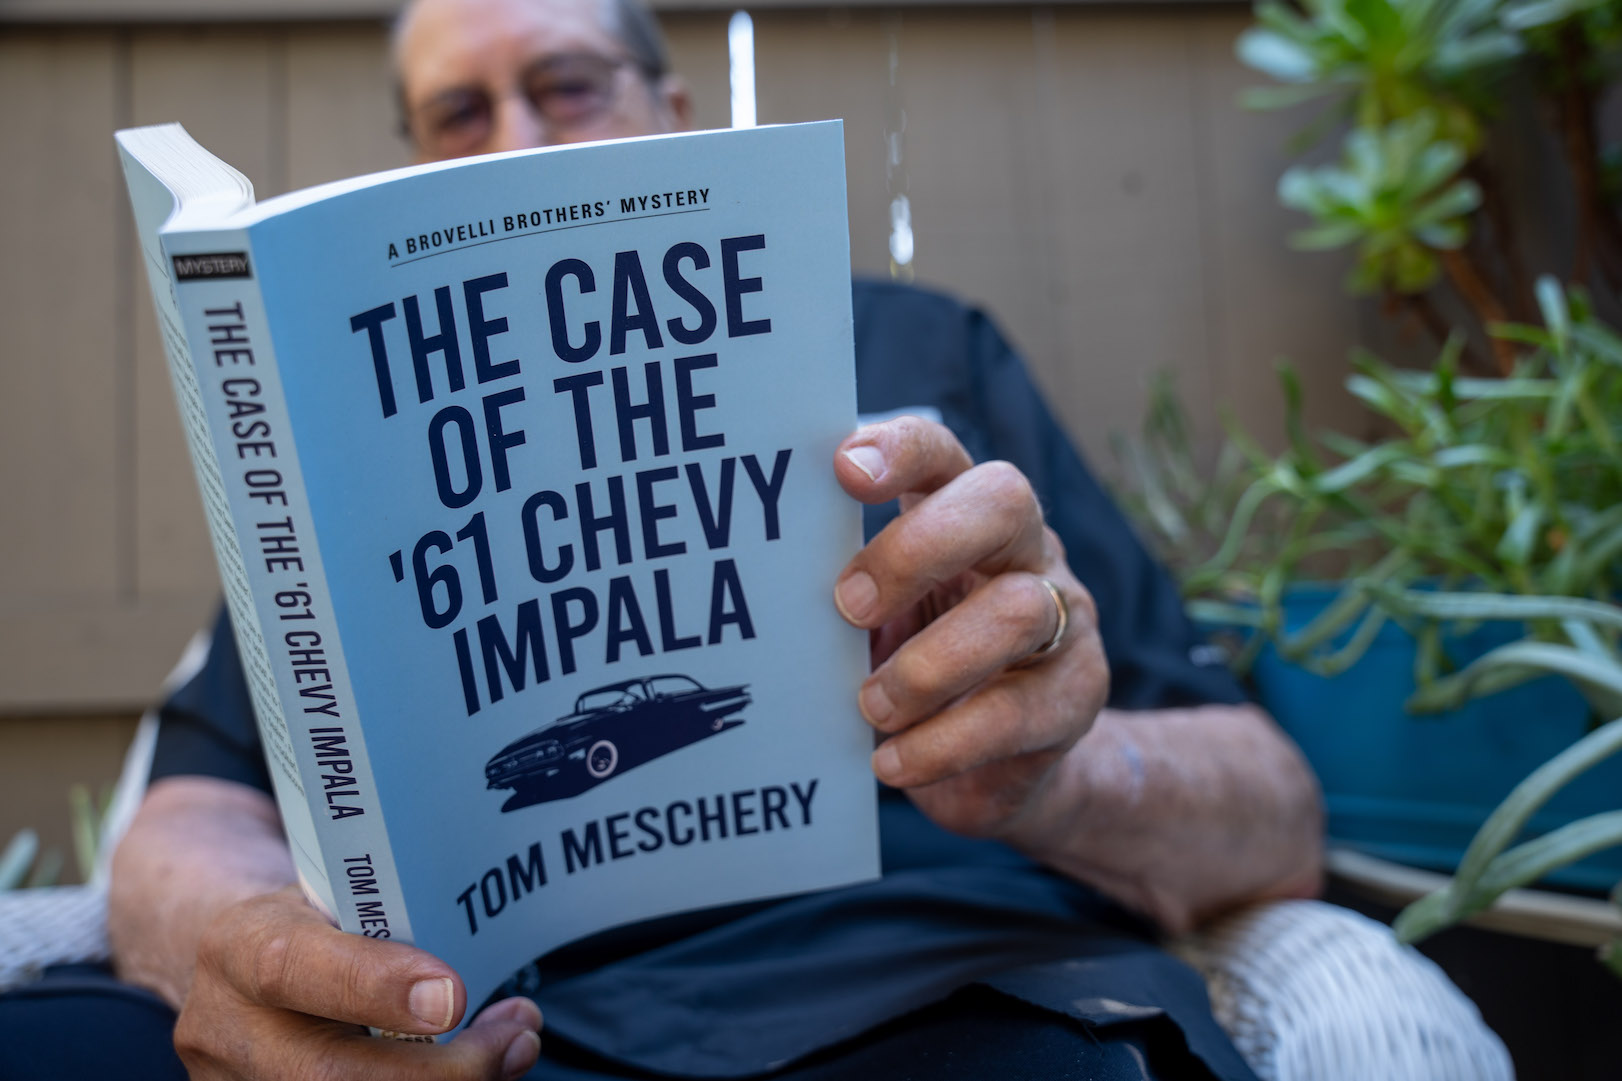 Tom Meschery reads his novel, The Case of the '61 Chevy Impala